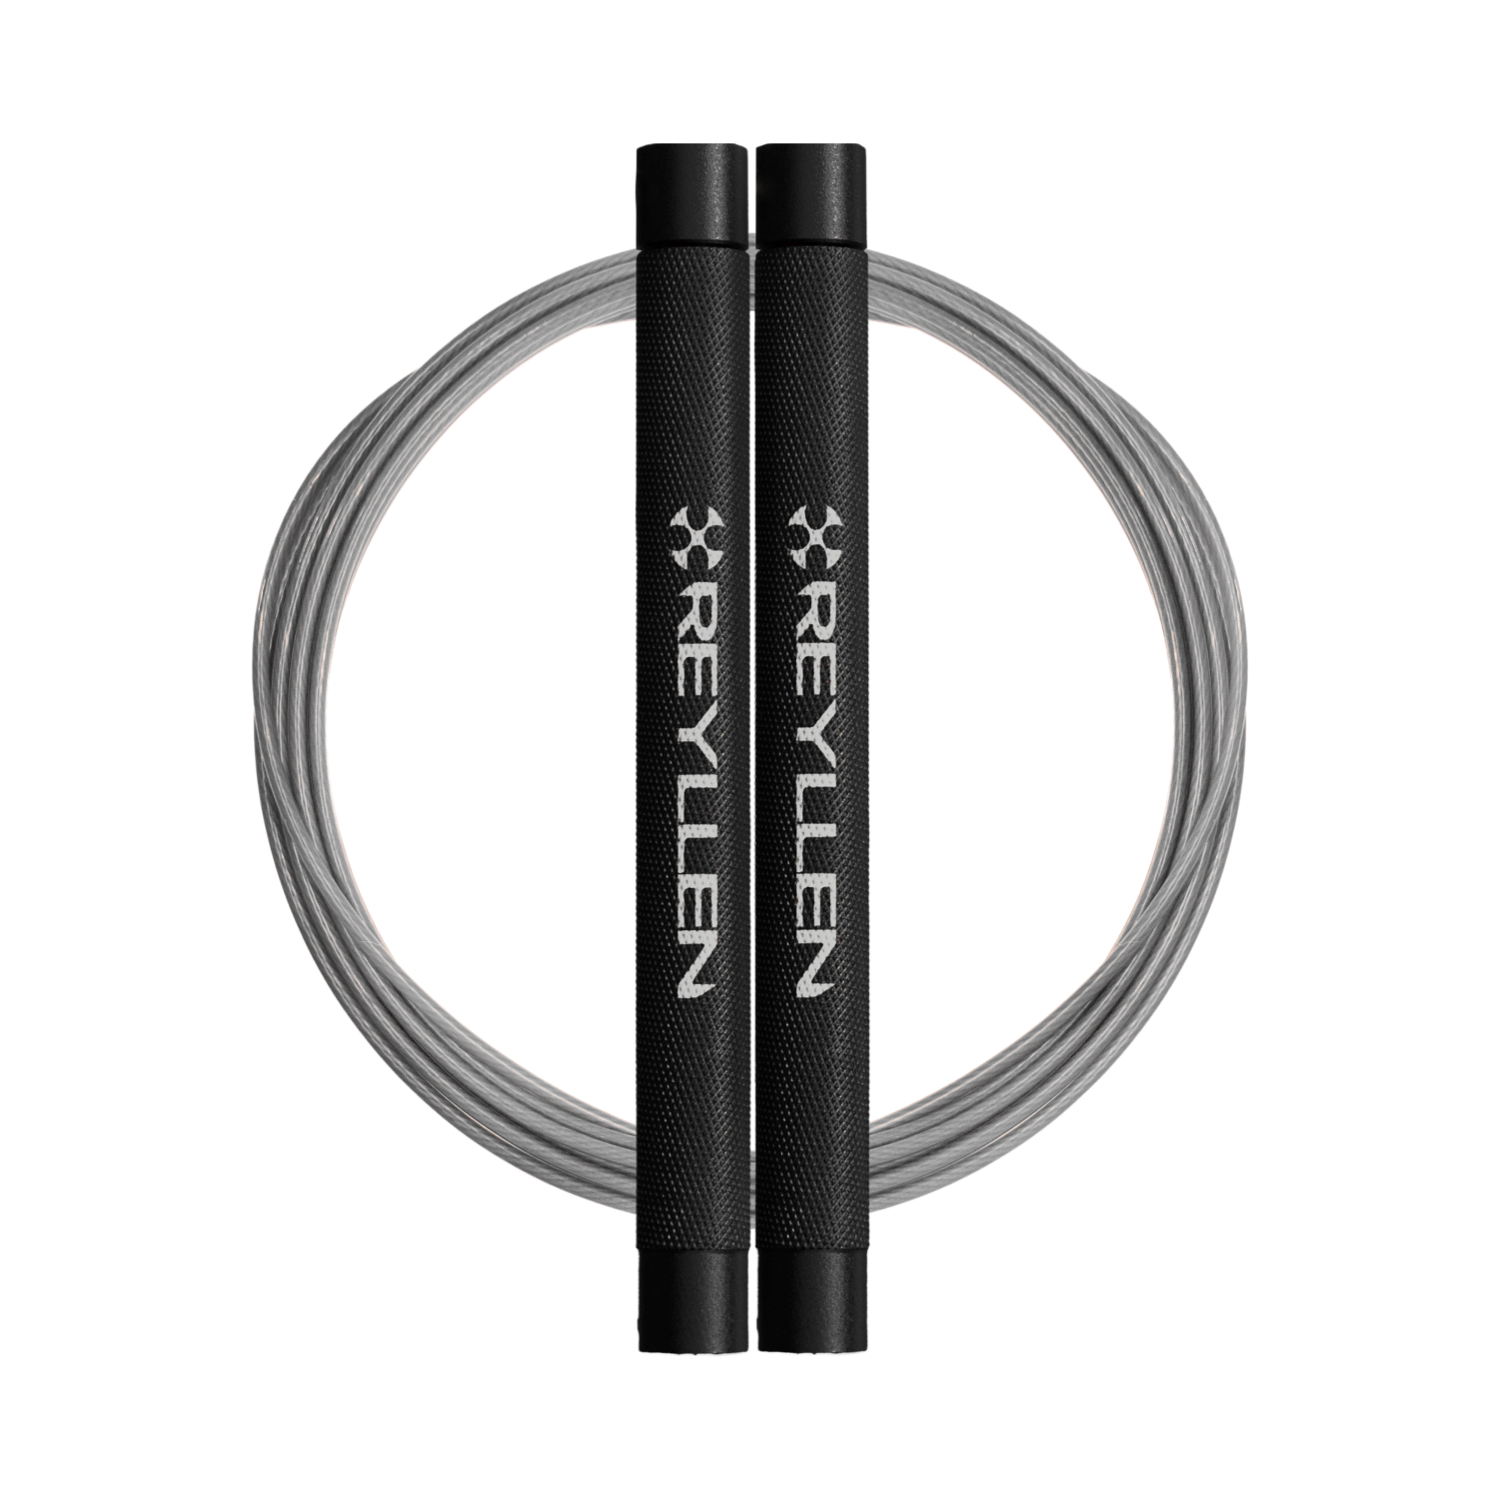 Reyllen Flare Mx Speed Skipping Jump Rope - Aluminium Handles - Black with grey pvc cable